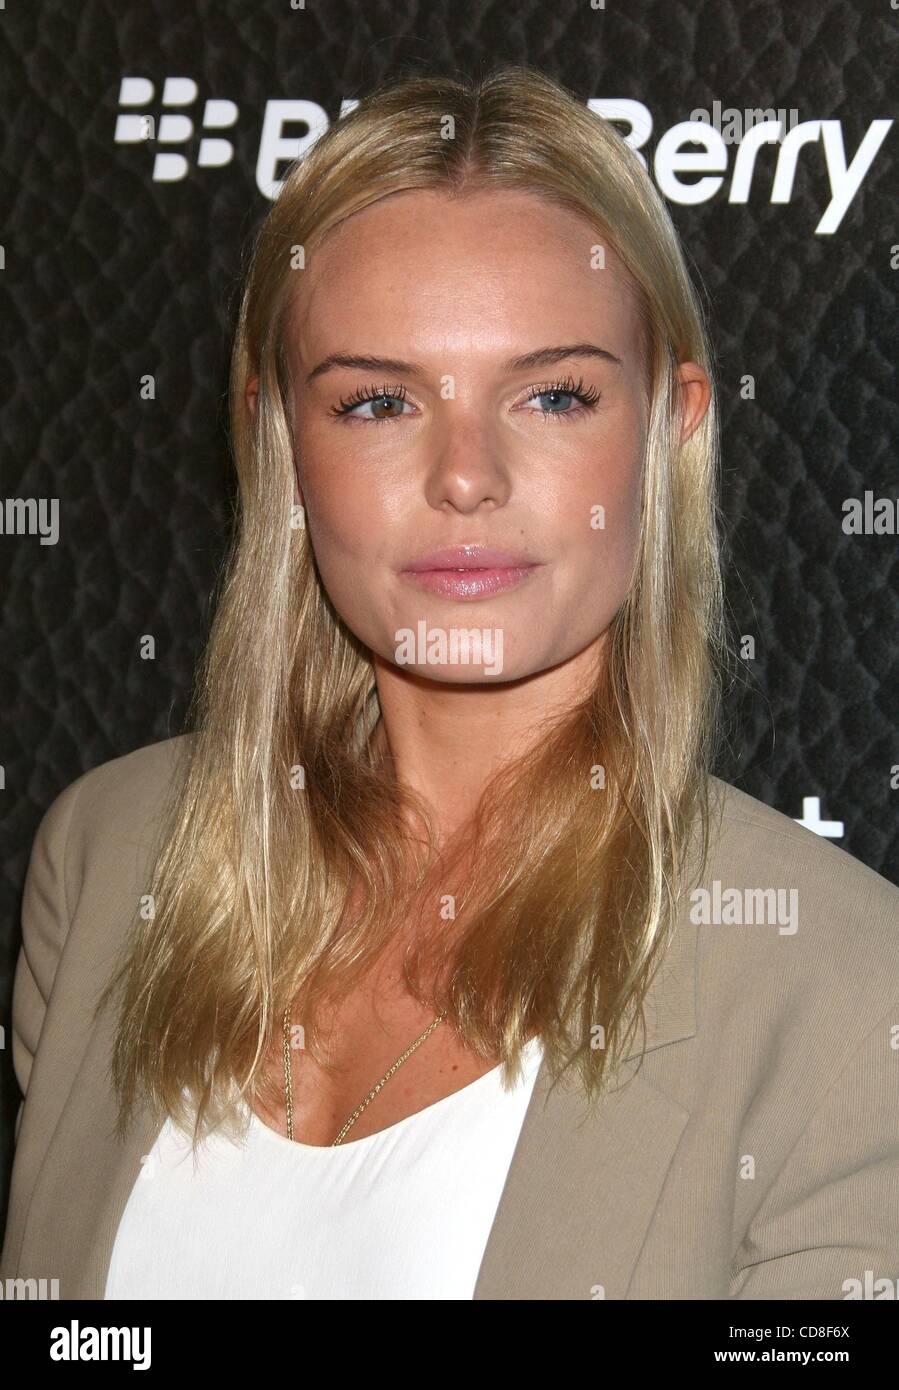 Oct 30 2008 Los Angeles California Usa Actress Kate Bosworth At The Launch Party For The